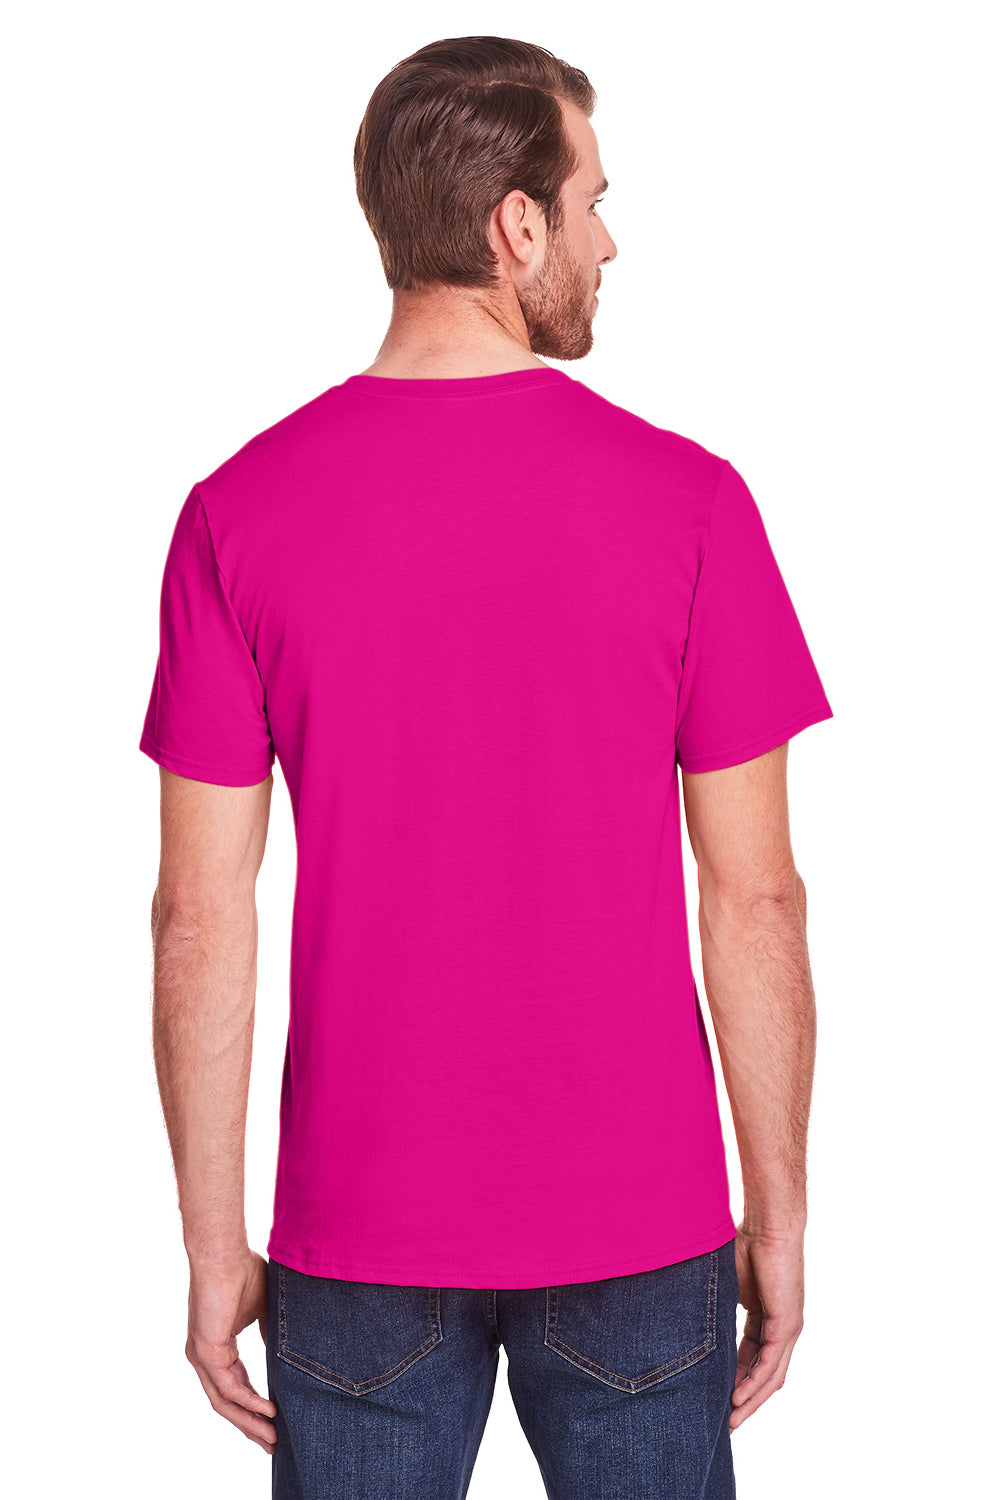 Fruit Of The Loom IC47MR Mens Iconic Short Sleeve Crewneck T-Shirt Cyber Pink Back